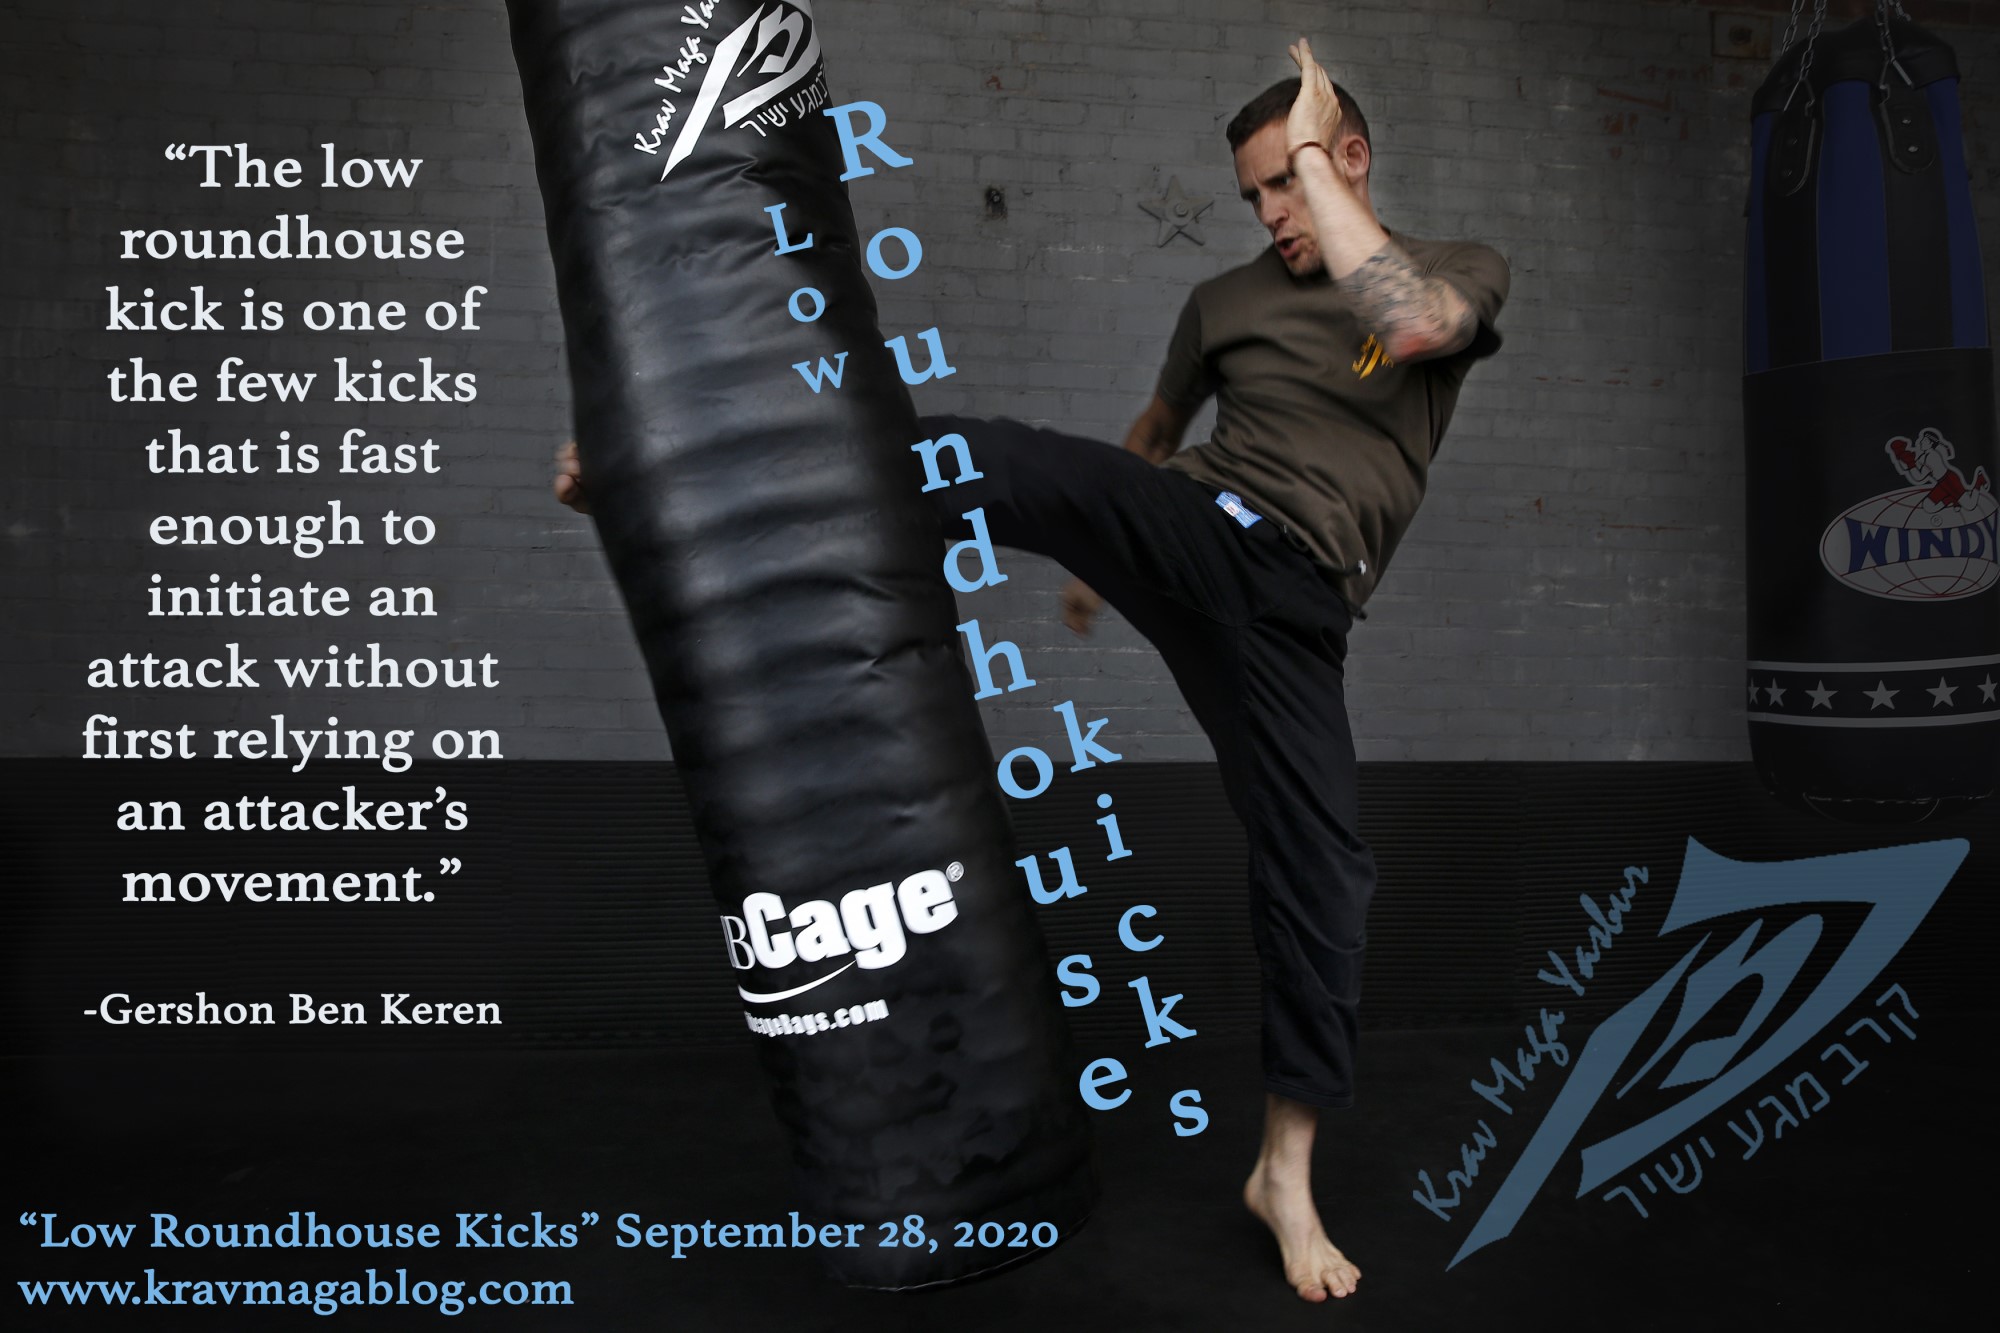 Blog About Roundhouse Kicks